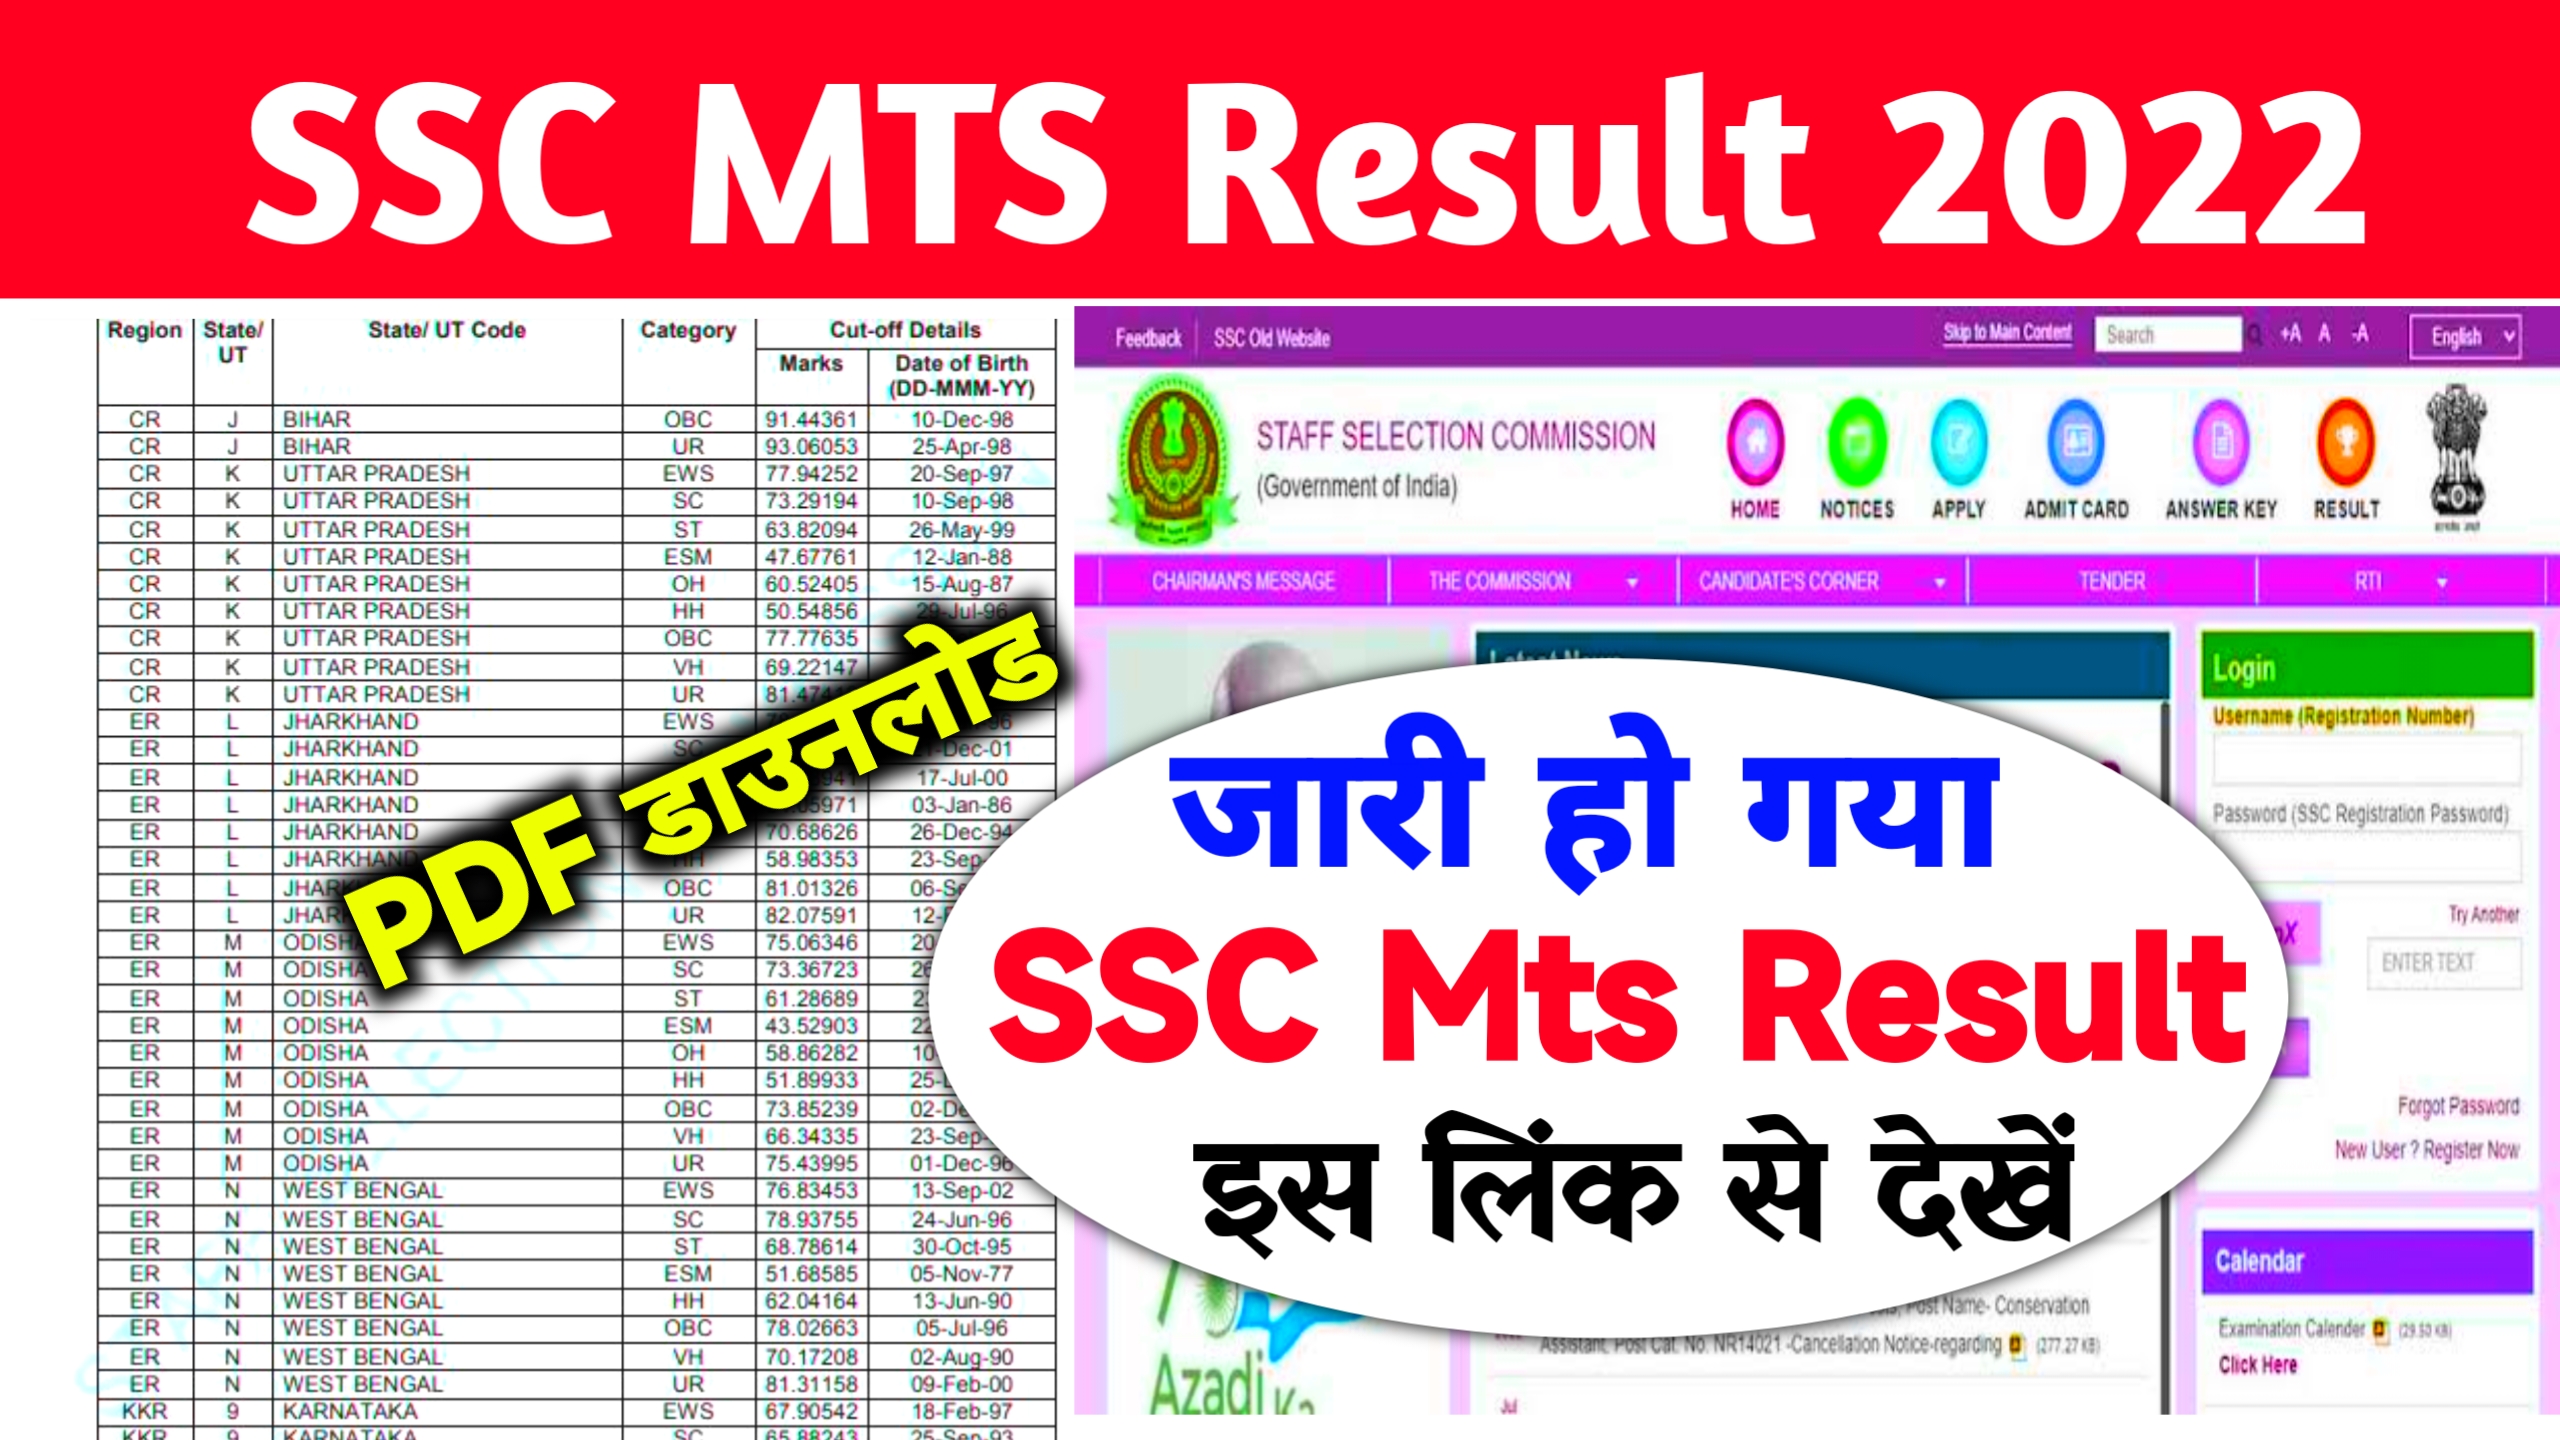 Ssc Mts Result 2022 Today @ssc.nic.in ~ Ssc Mts Cut Off & Merit List Link